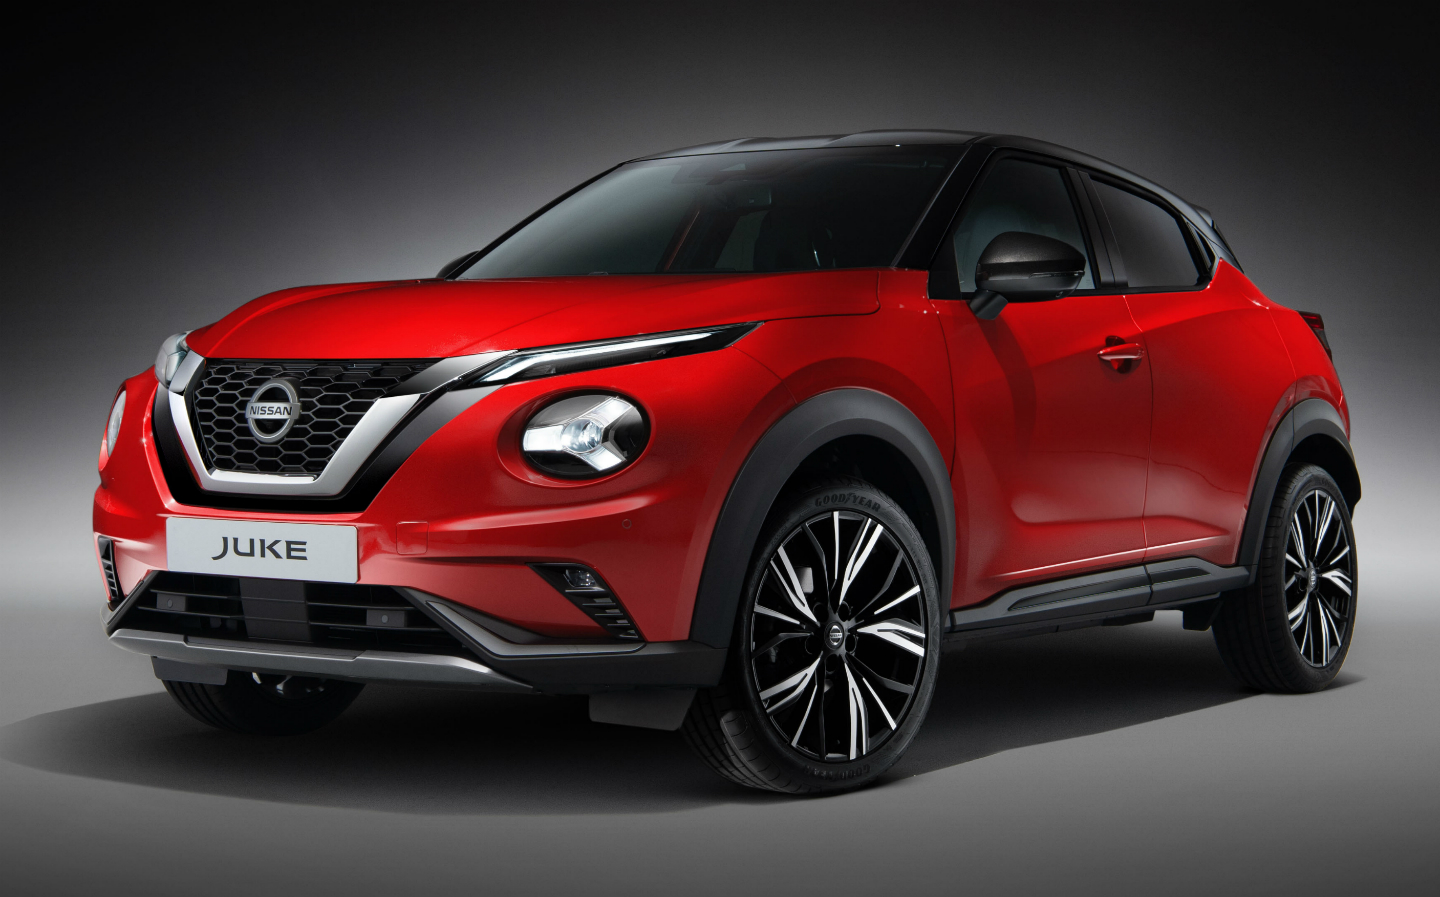 2020 Nissan Juke: photos, prices, engines, technology and on sale date